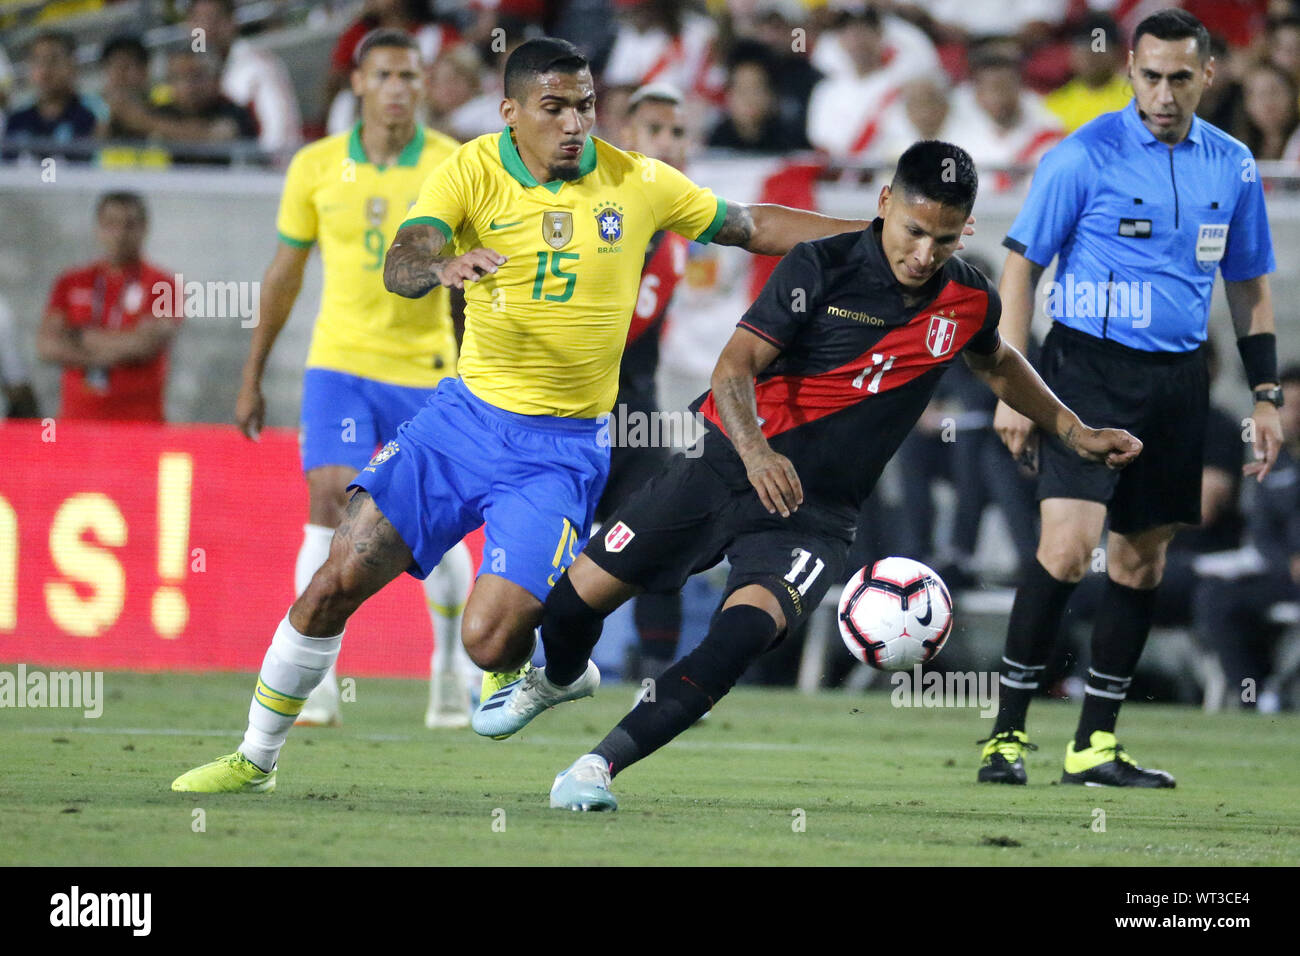 Los Angeles, California, USA. 11th Sep, 2019. Peru forward Raul Ruidiaz (11) and Brazil midfielder Allan (15) vie for the ball during an International Friendly Soccer match between Brazil and Peru at the Los Angeles Memorial Coliseum in Los Angeles on Tuesday, September 10, 2019. Credit: Ringo Chiu/ZUMA Wire/Alamy Live News Stock Photo